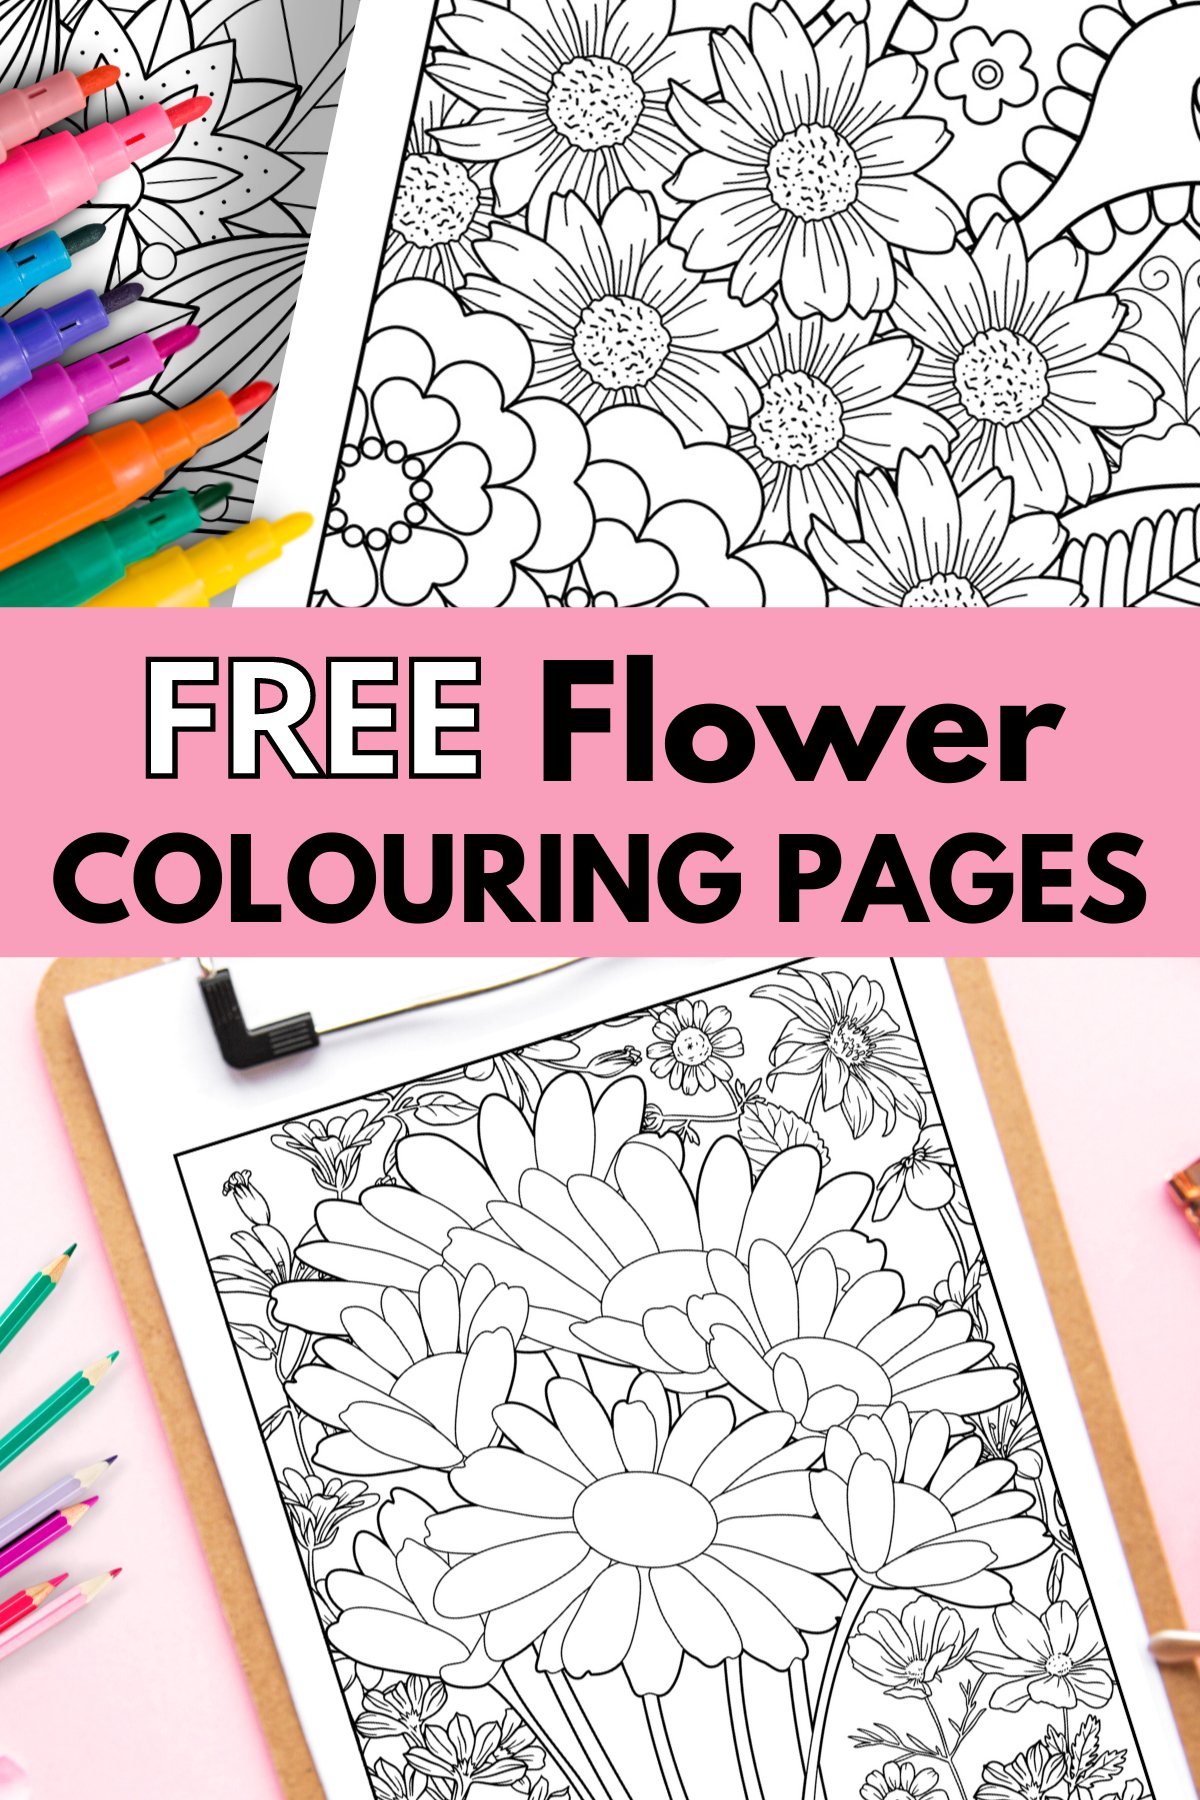 Adult Coloring Book 10 Flowers Coloring Pages , Instant Download, Relax  Flowers Mandala Design to Color for Adult to Print and Color 